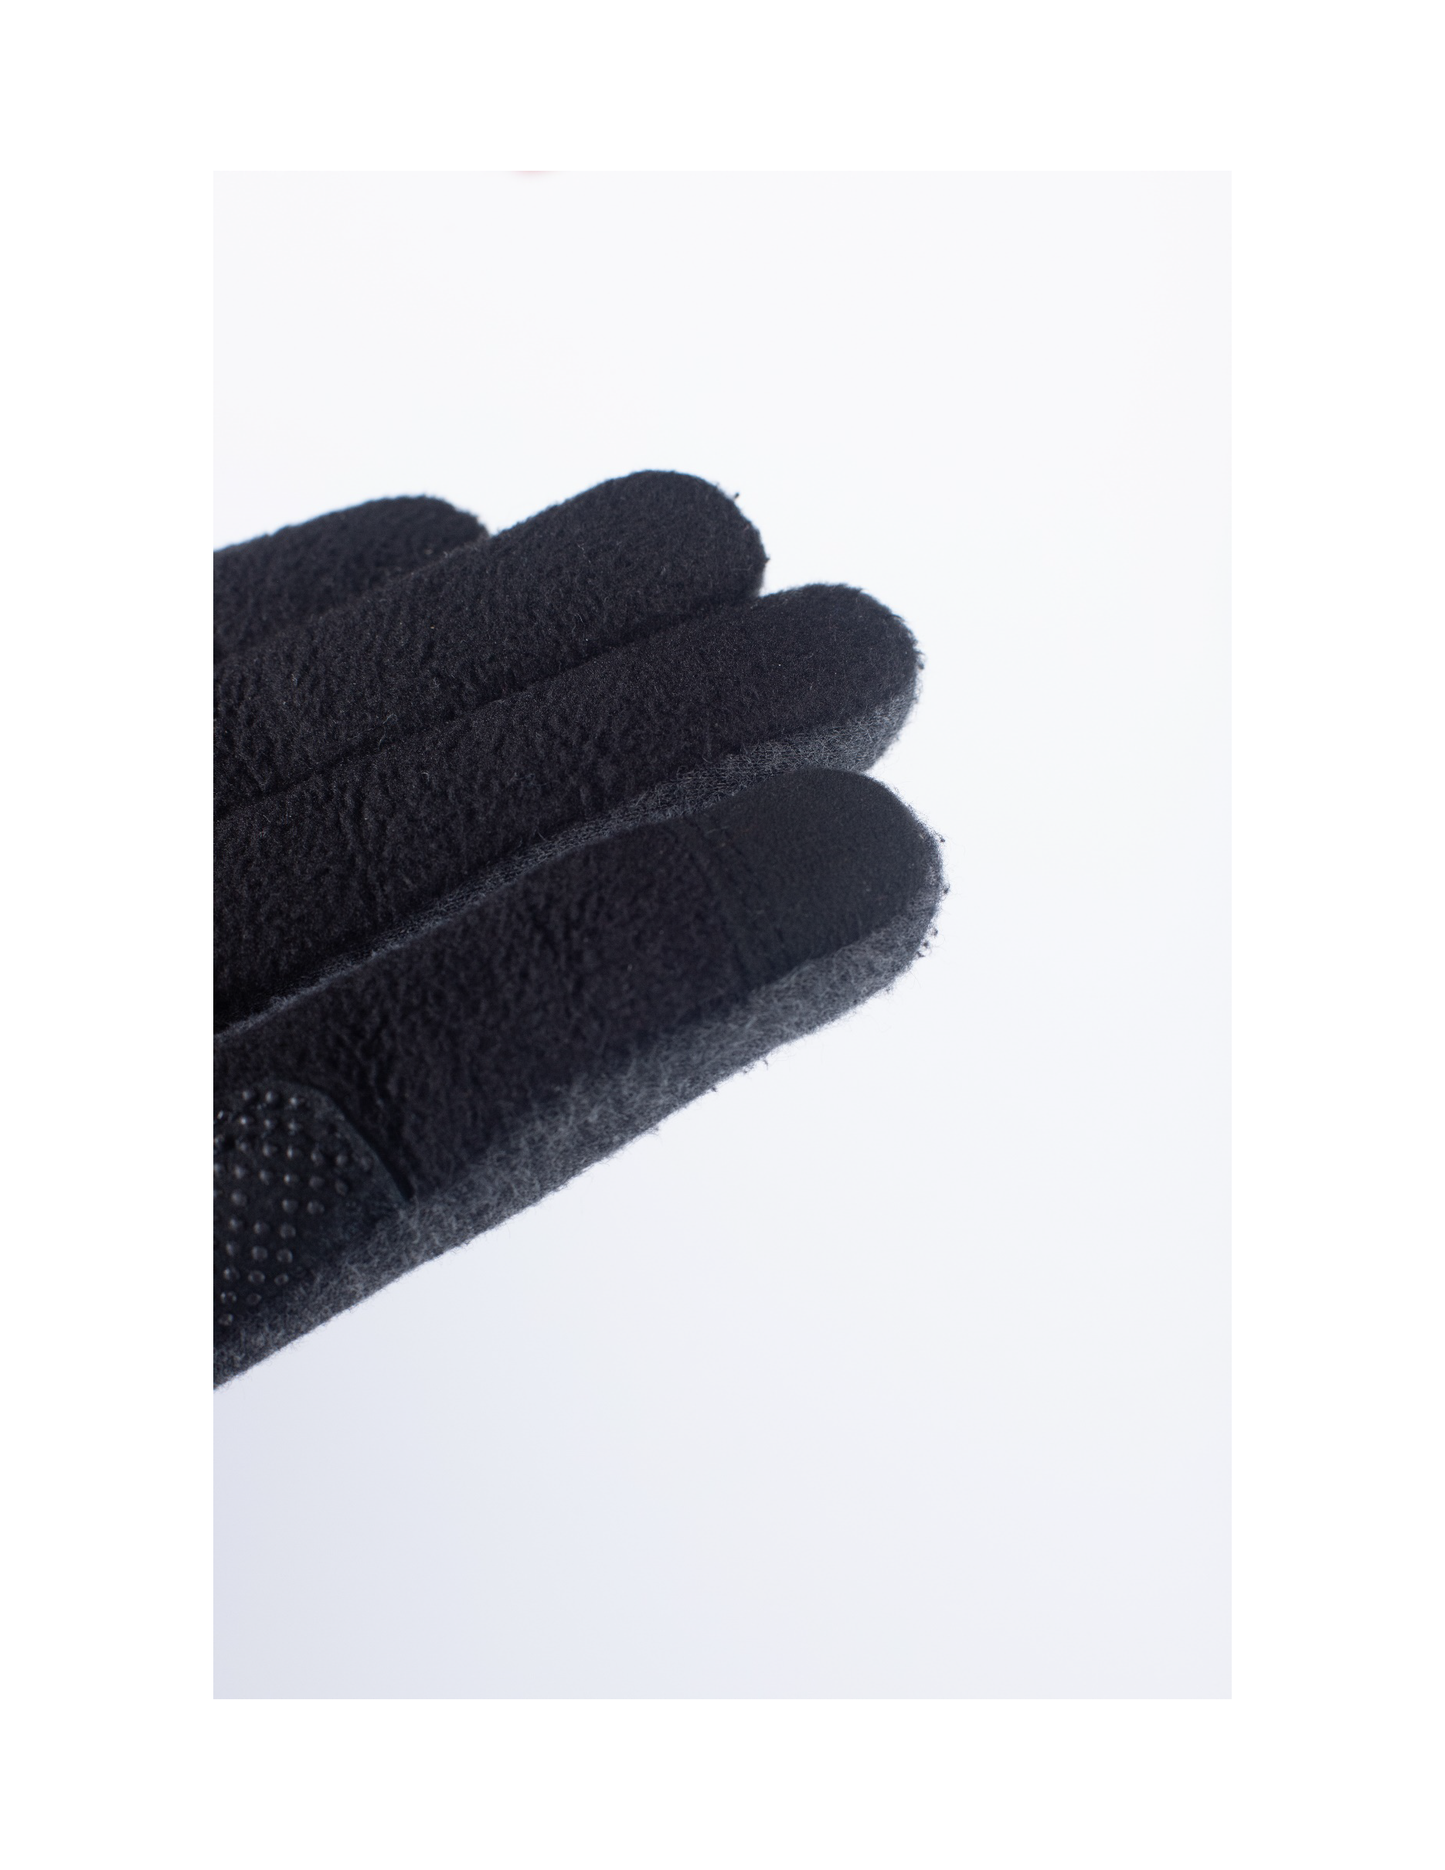 LIGHT INSULATED GLOVE * Willow